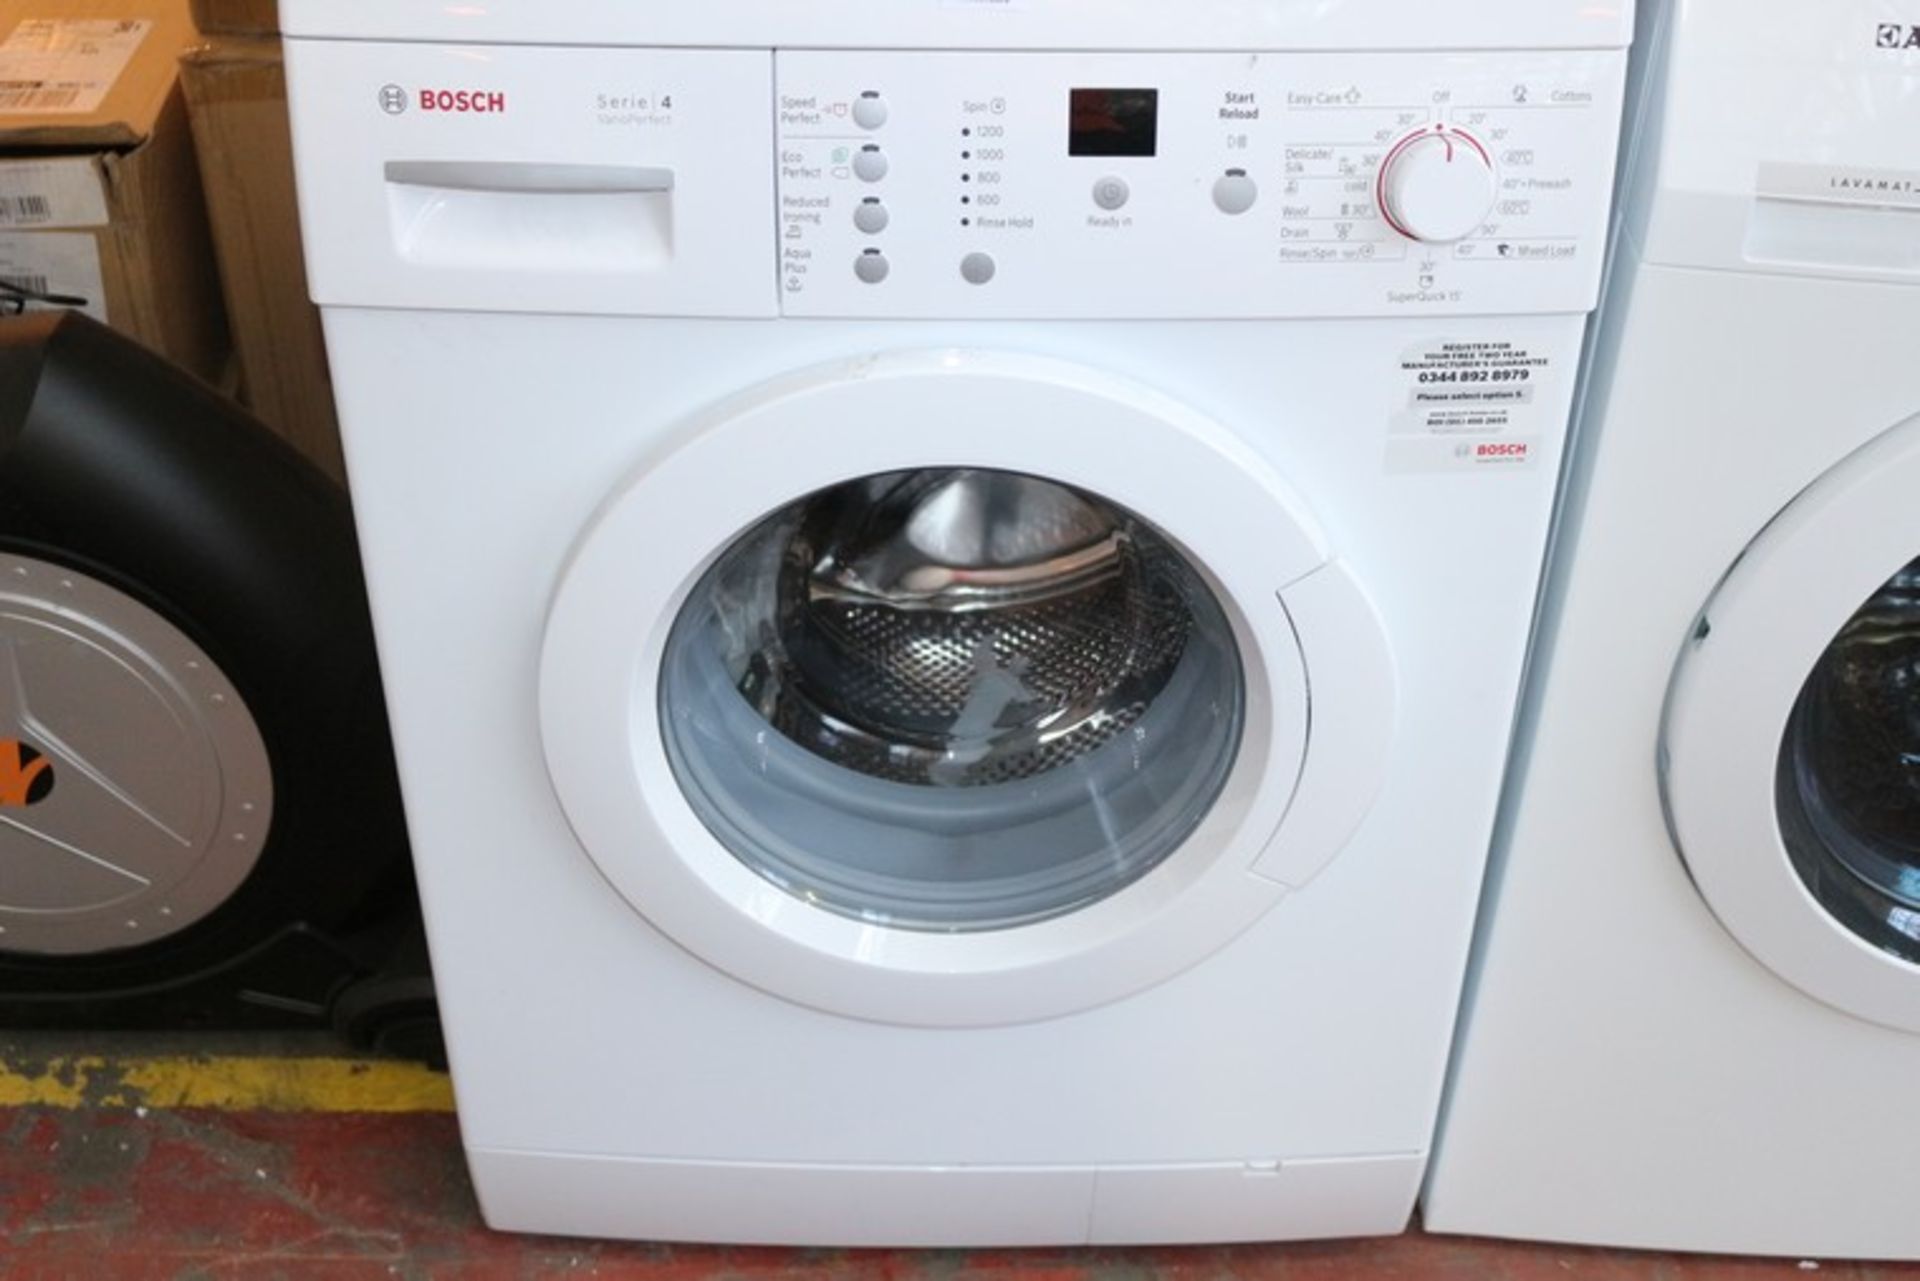 1 x BOSCH SERIES 4 VARIO PERFECT 1200RPM UNDER THE COUNTER WASHING MACHINE RRP £330 (225712) (24.